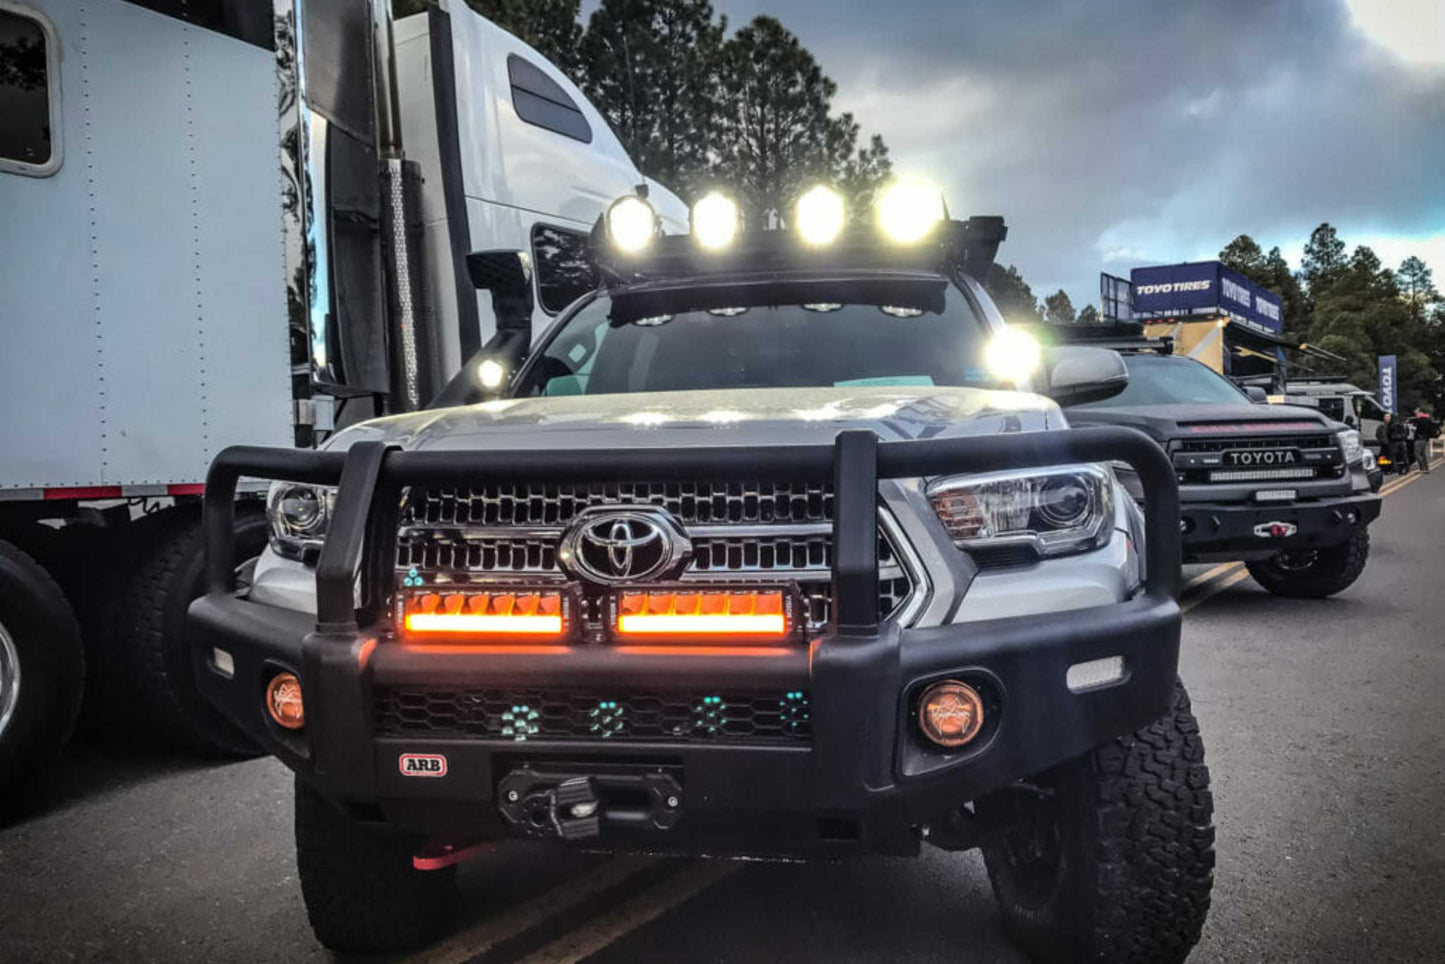 Vision X Shocker LED Light Bar: 30in (White Photon Light Pipe / With Harness)